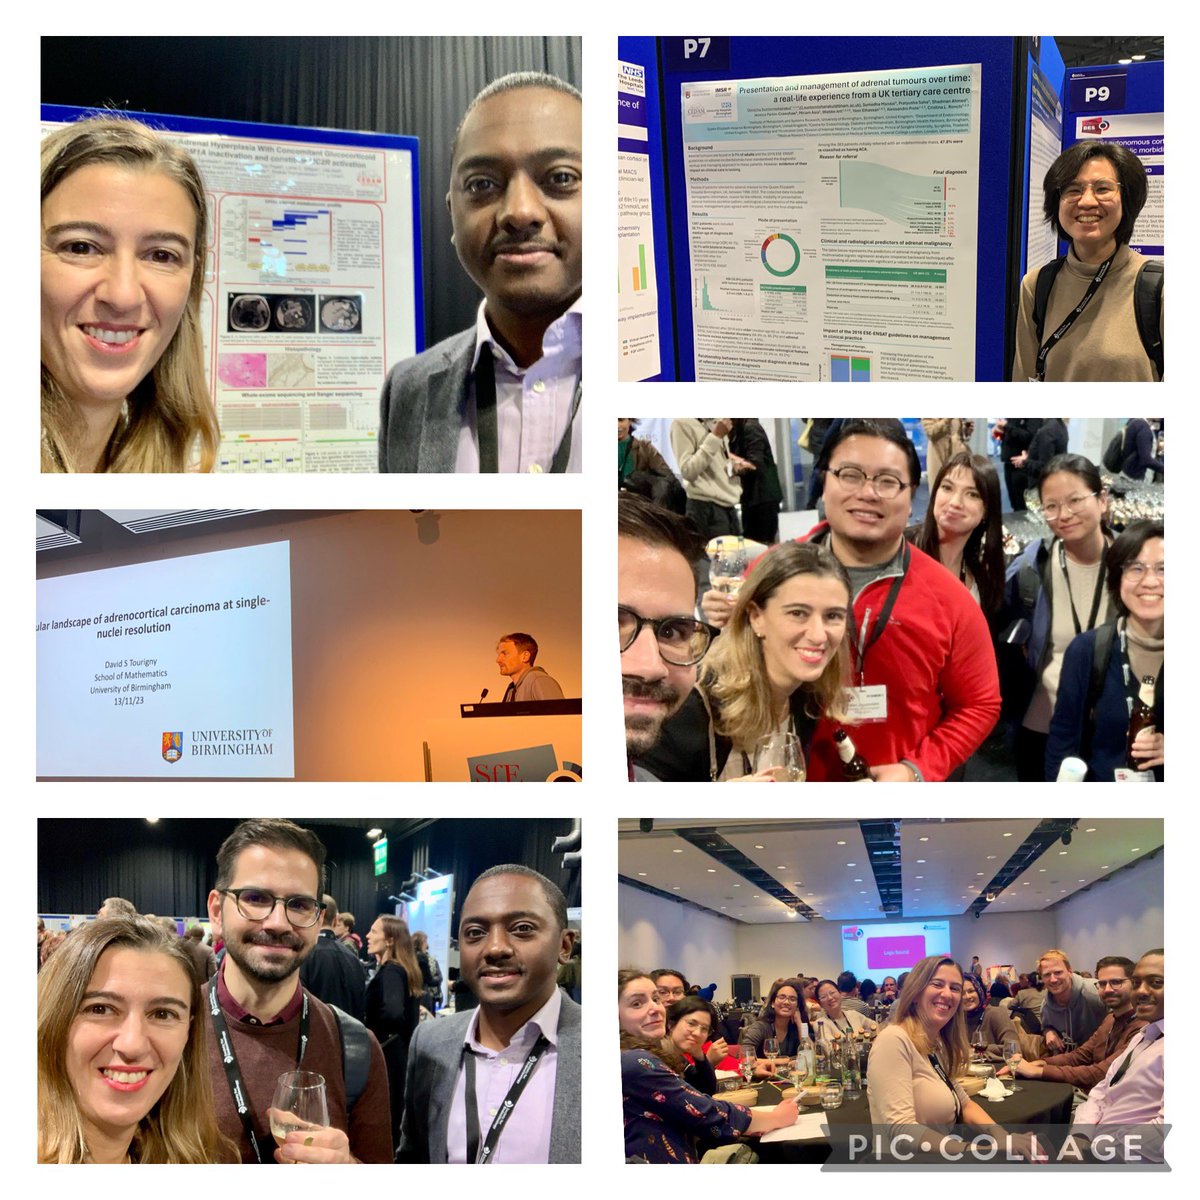 Overview of Day 1 afternoon at @Soc_Endo #BES2023 with Birmingham Adrenal Team well represented at #adrenal oral and poster sessions & Quiz Dinner